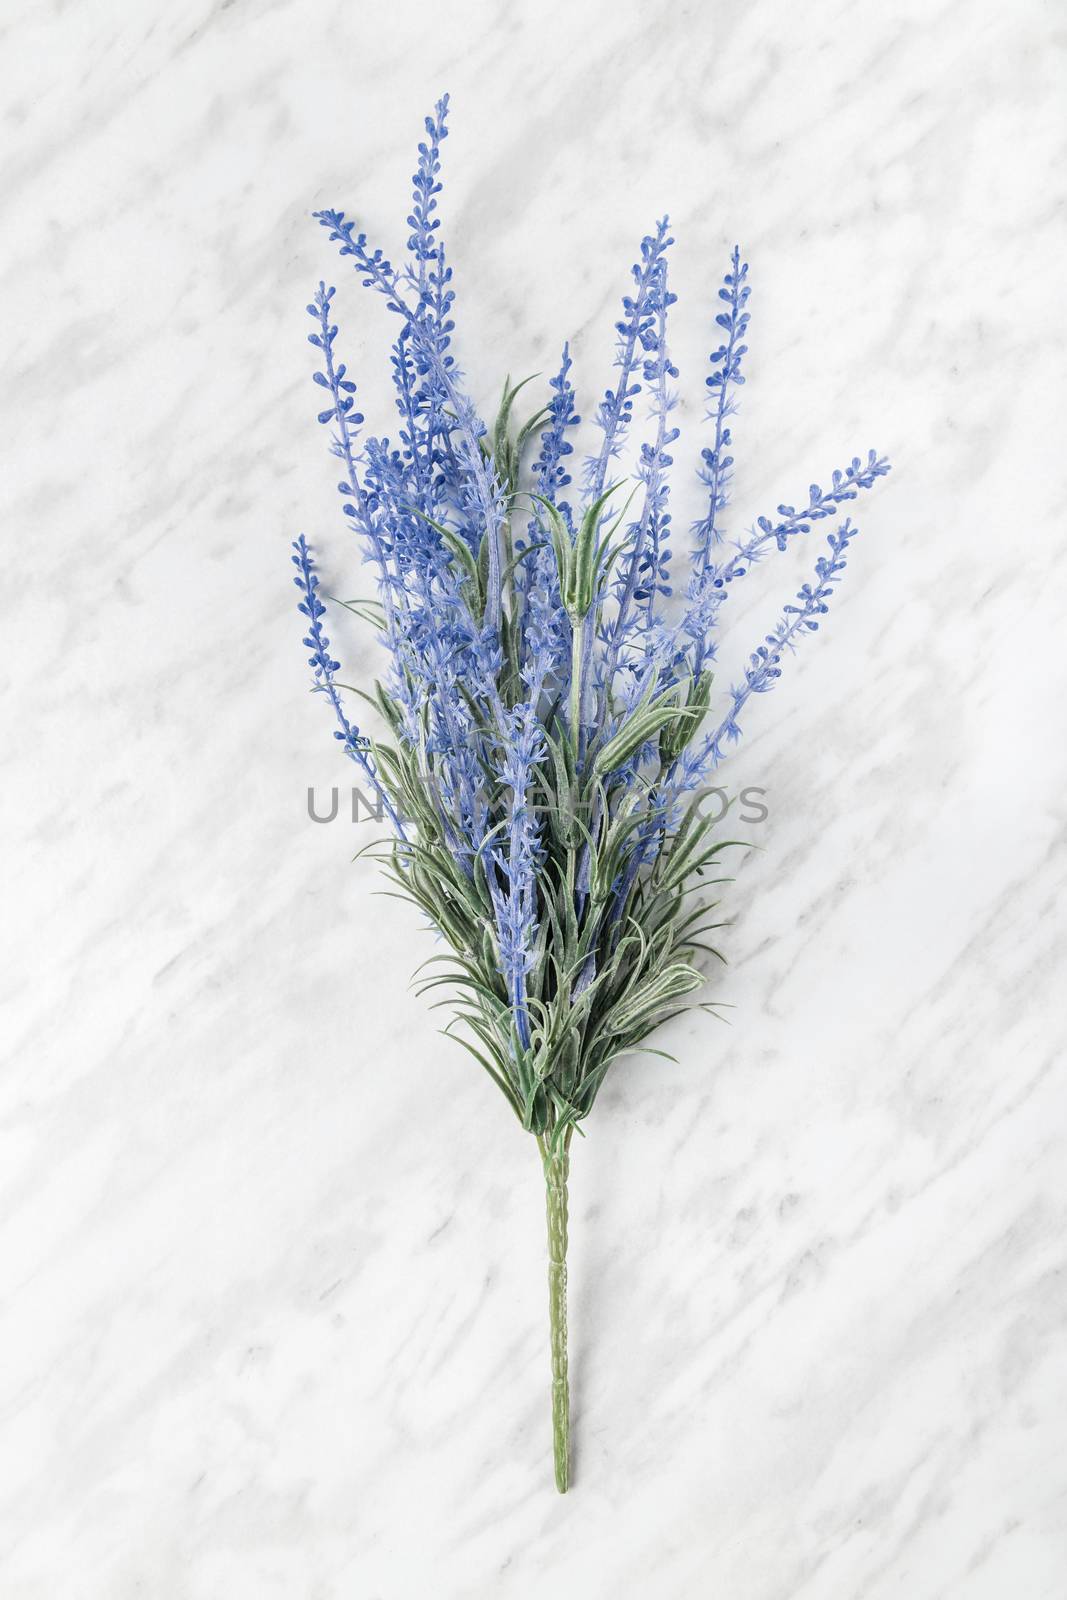 Blooming lavender on marble background by anikasalsera